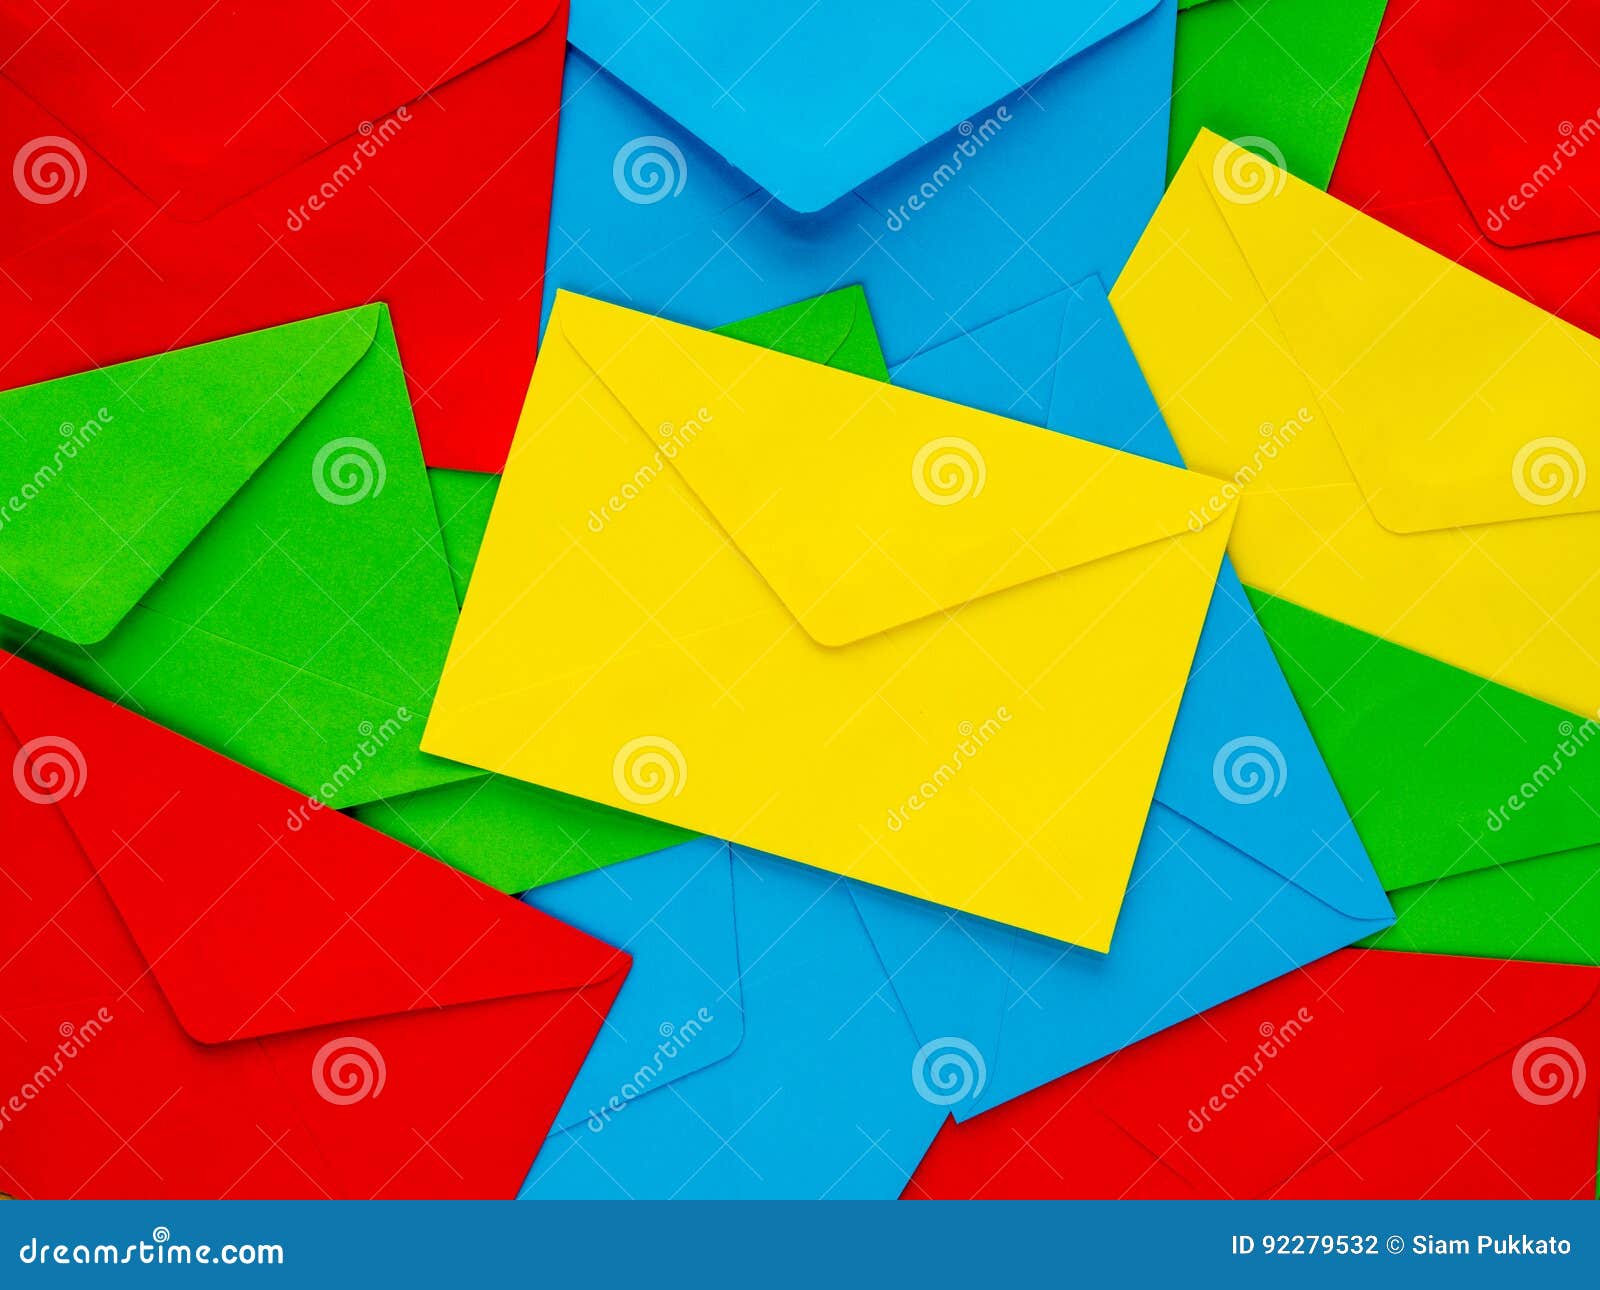 cover letter background image